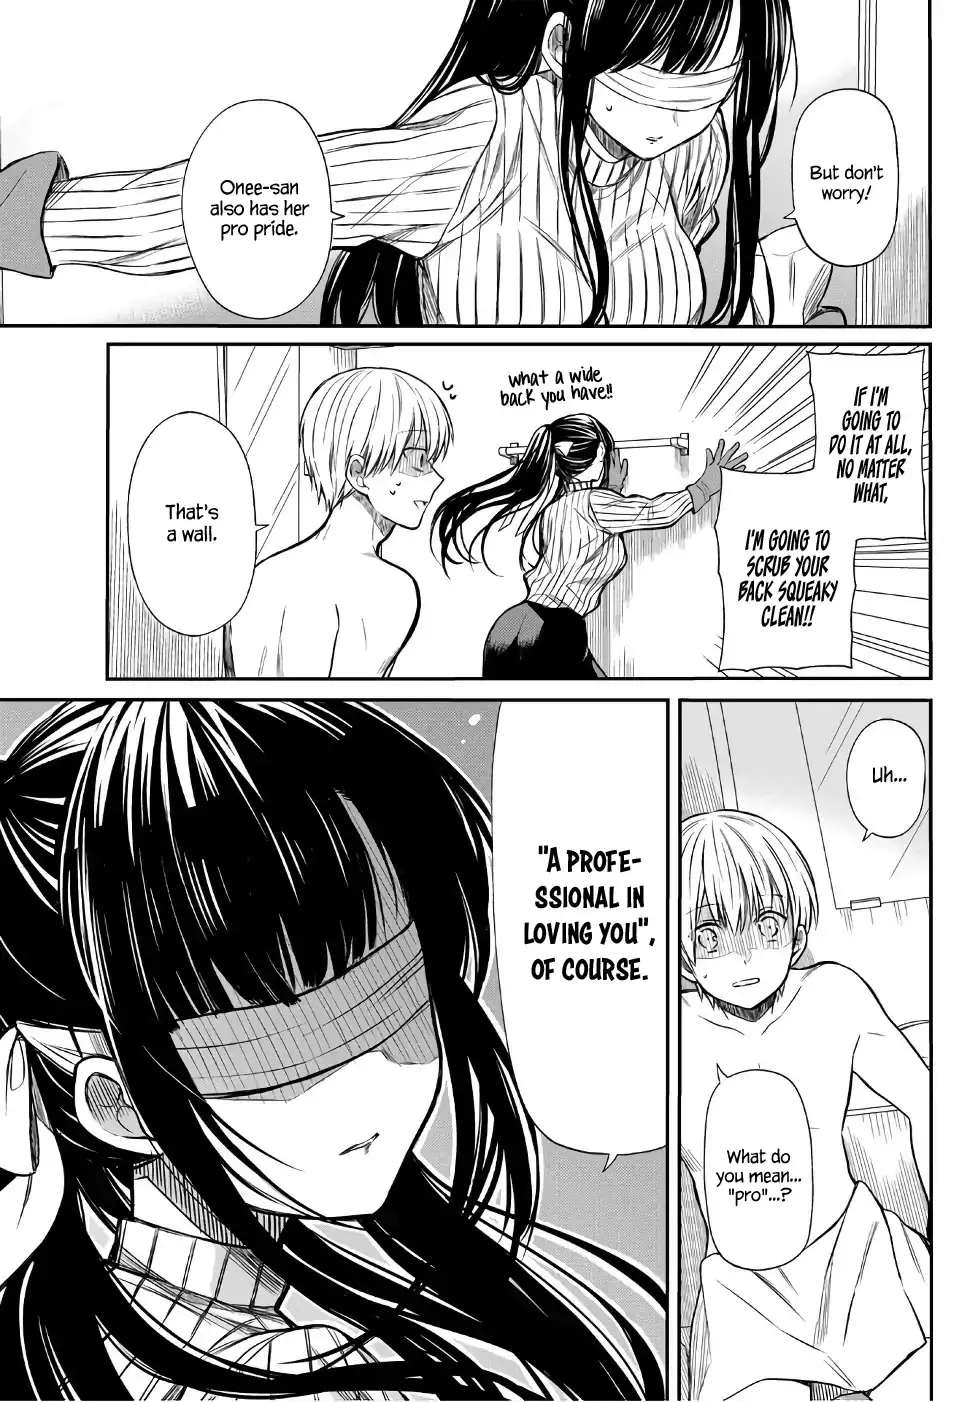 The Story Of An Onee-San Who Wants To Keep A High School Boy - 8 page 4